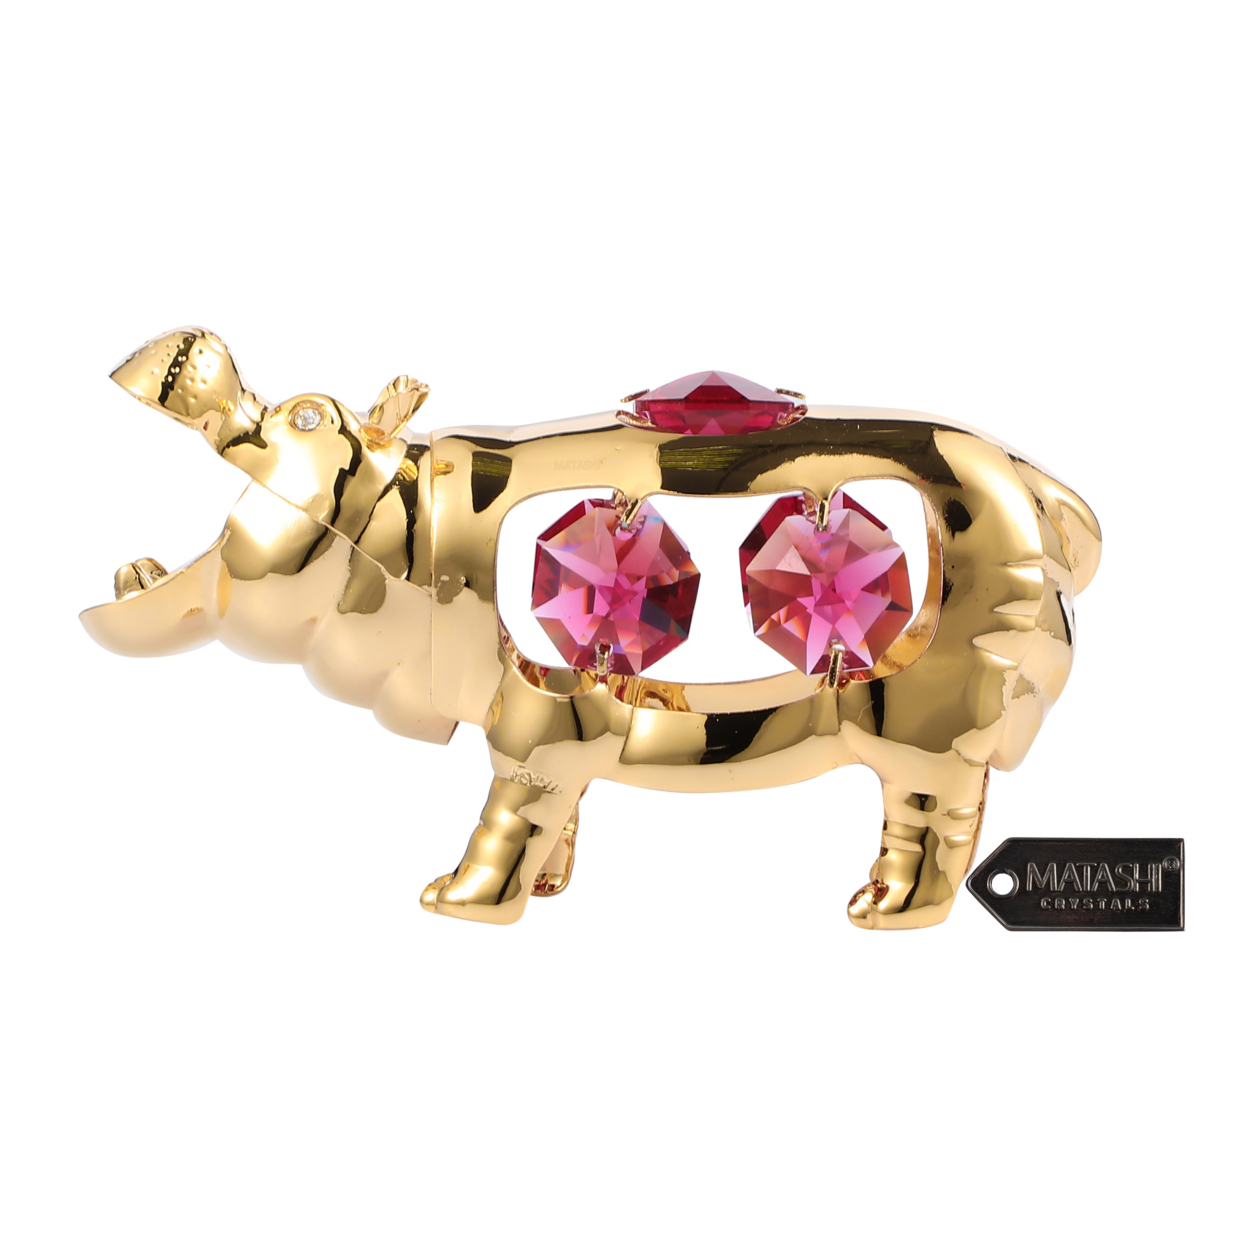 Matashi 24K Gold Plated Crystal Studded Open Mouth Hippo Ornament Holiday Decor Gift For Christmas Mother's Day Birthday Anniversary